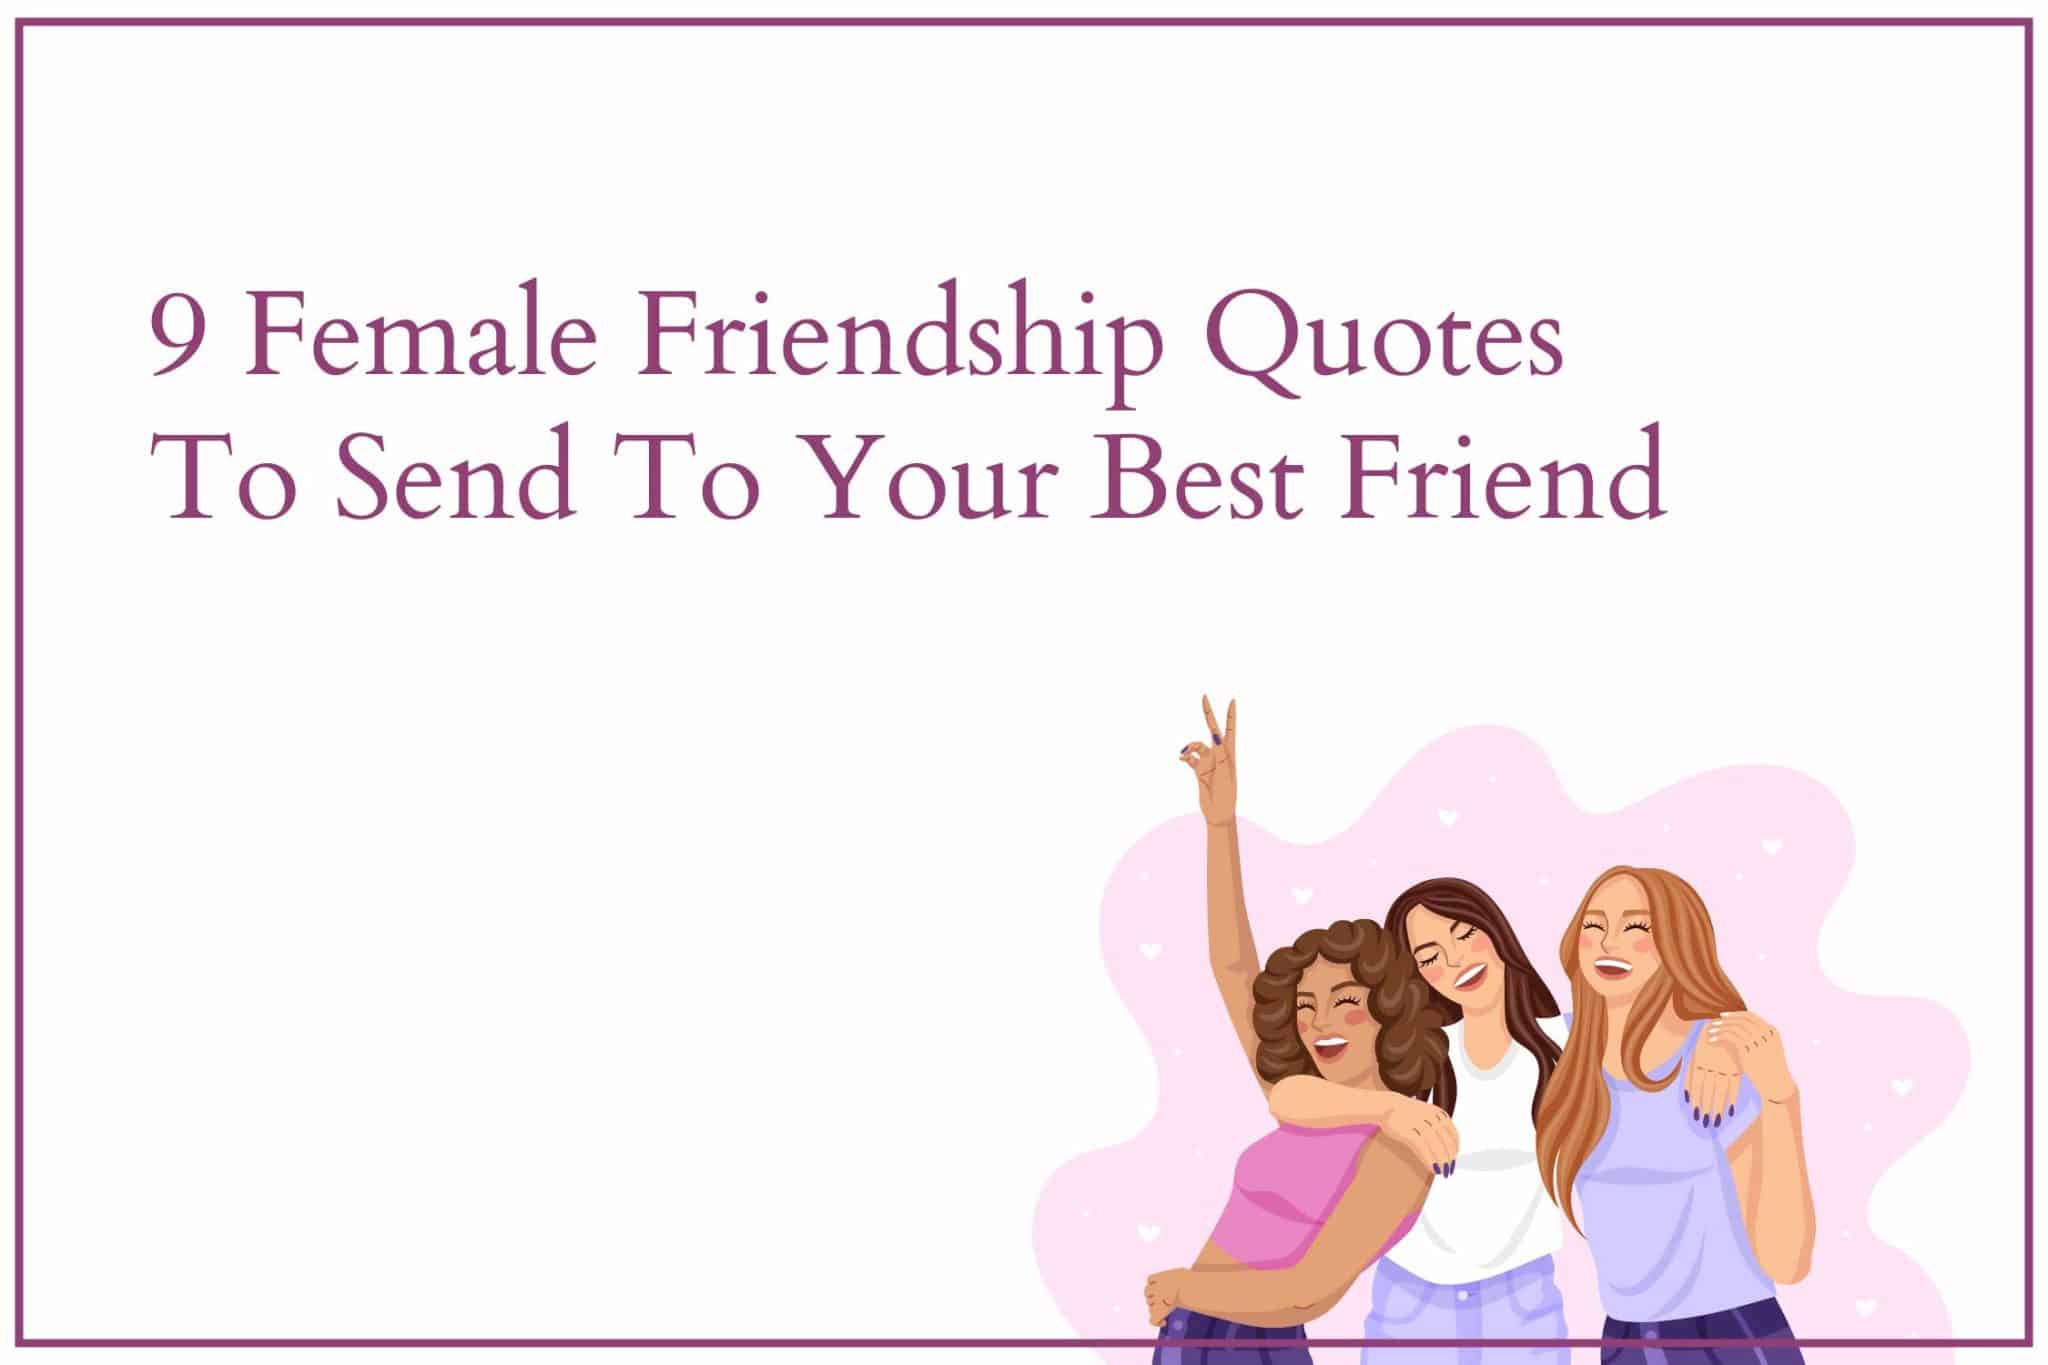 https://www.bonobology.com/wp-content/uploads/2023/07/9-Female-Friendship-Quotes-To-Send-To-Your-Best-Friend.jpg